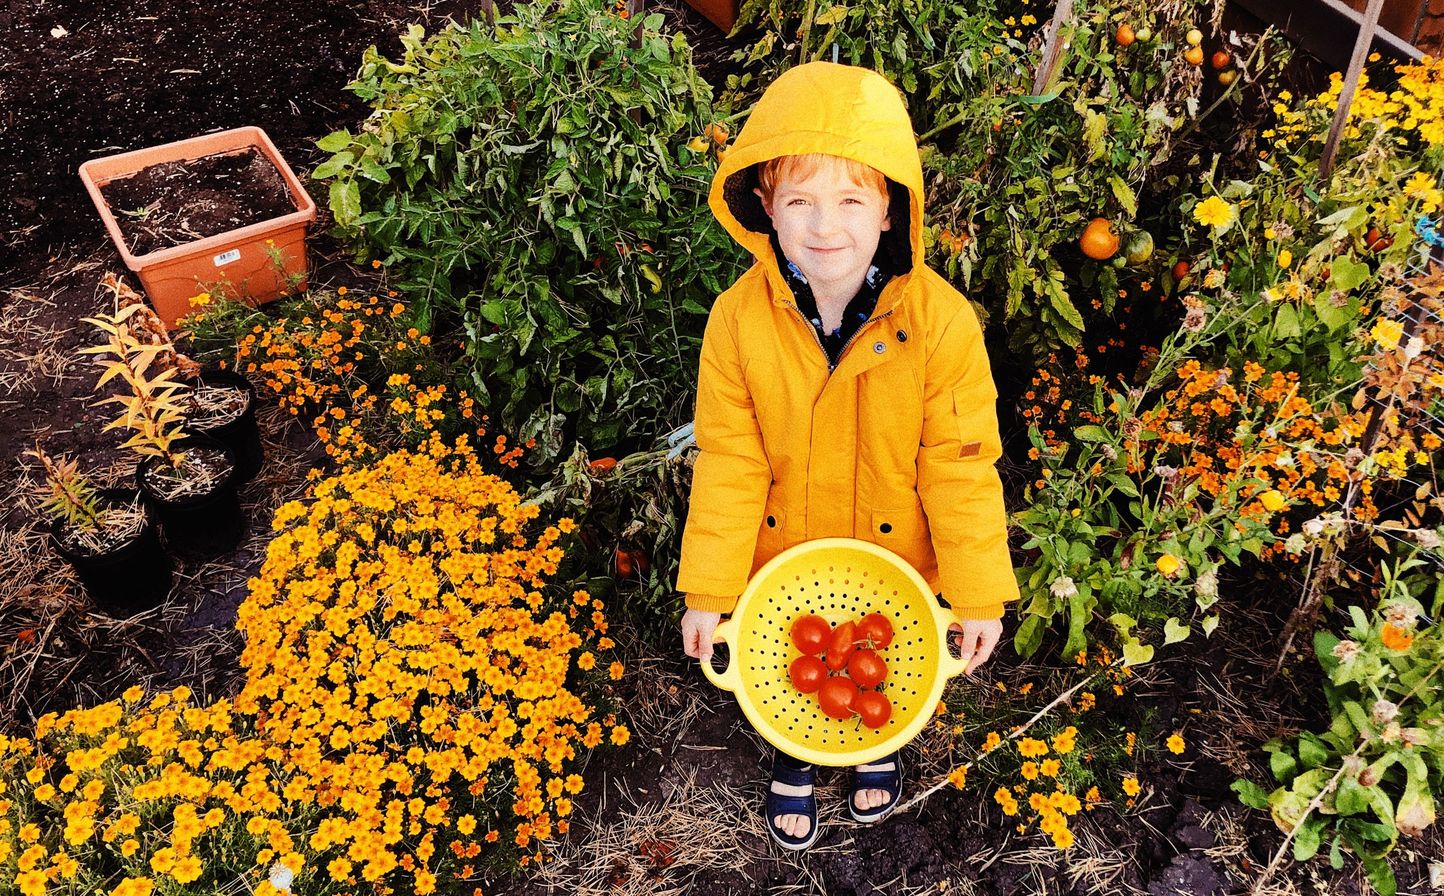 A young boy stands in a garden, wearing a yellow raincoat and holding a basket of tomatoes.